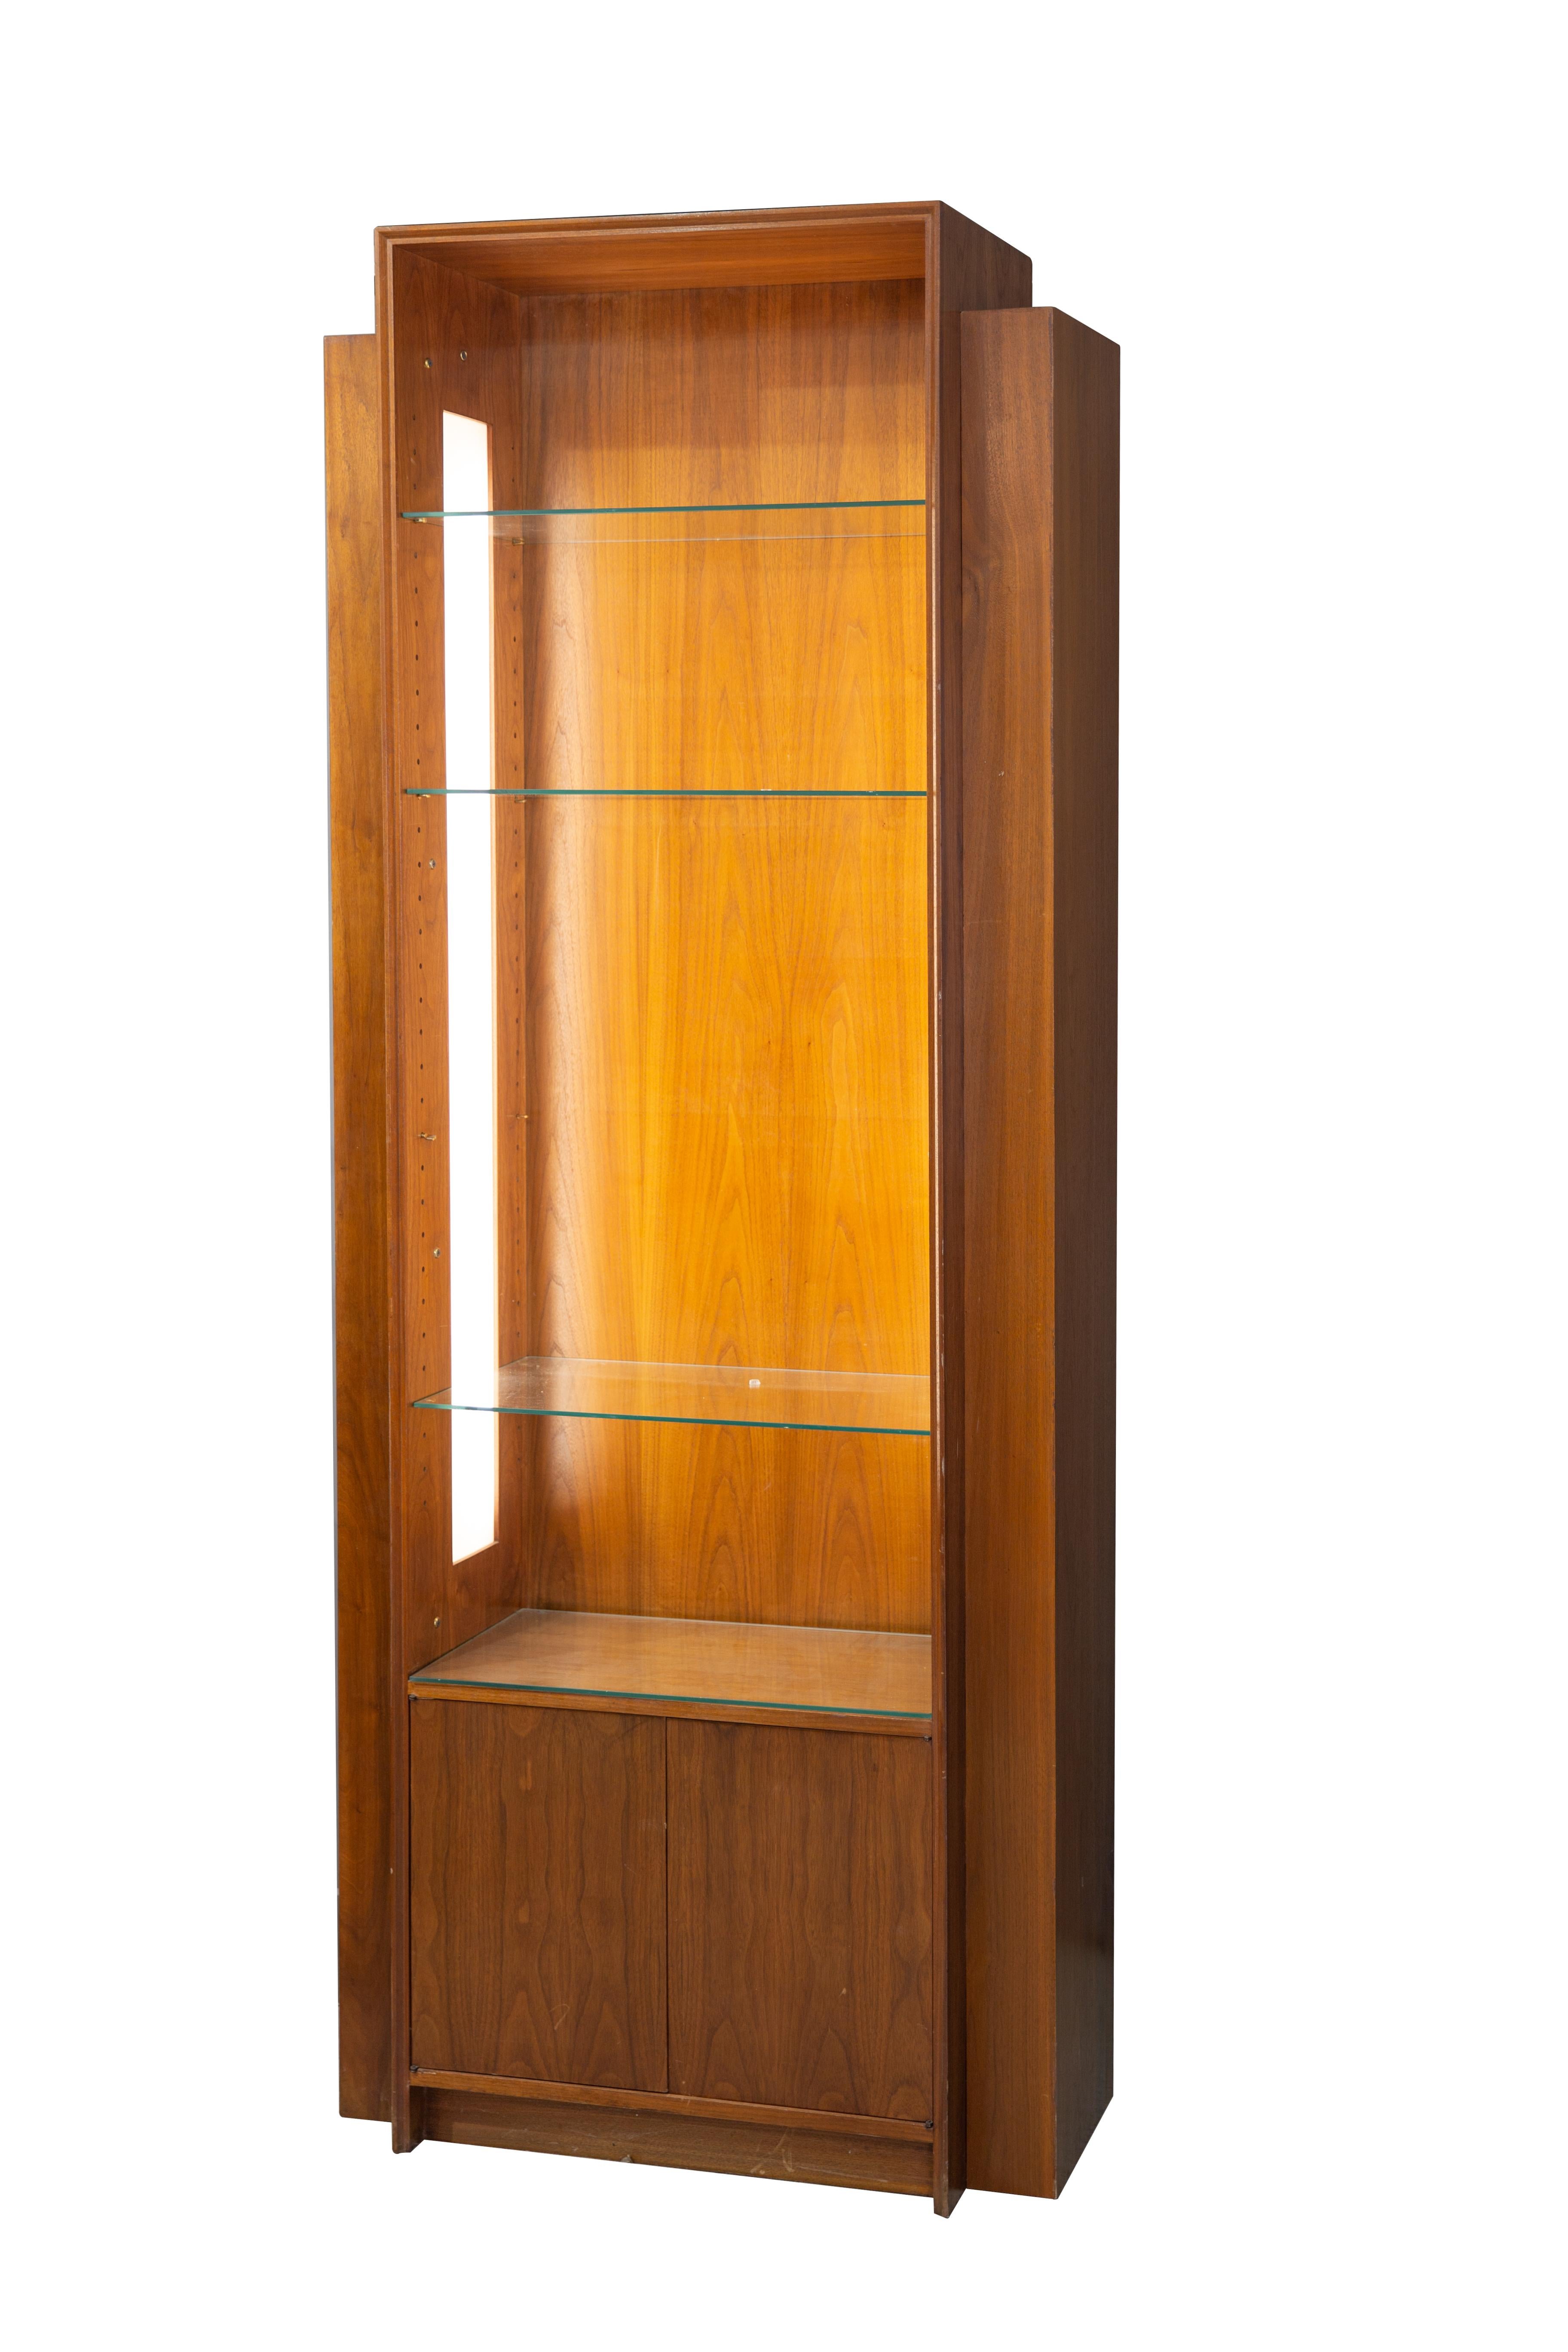 Mid-Century Art Deco skyscraper design open front walnut display cabinet with 4 glass shelves and interior side illumination. It’s in good condition and dates circa 1965. It measures approximate 84